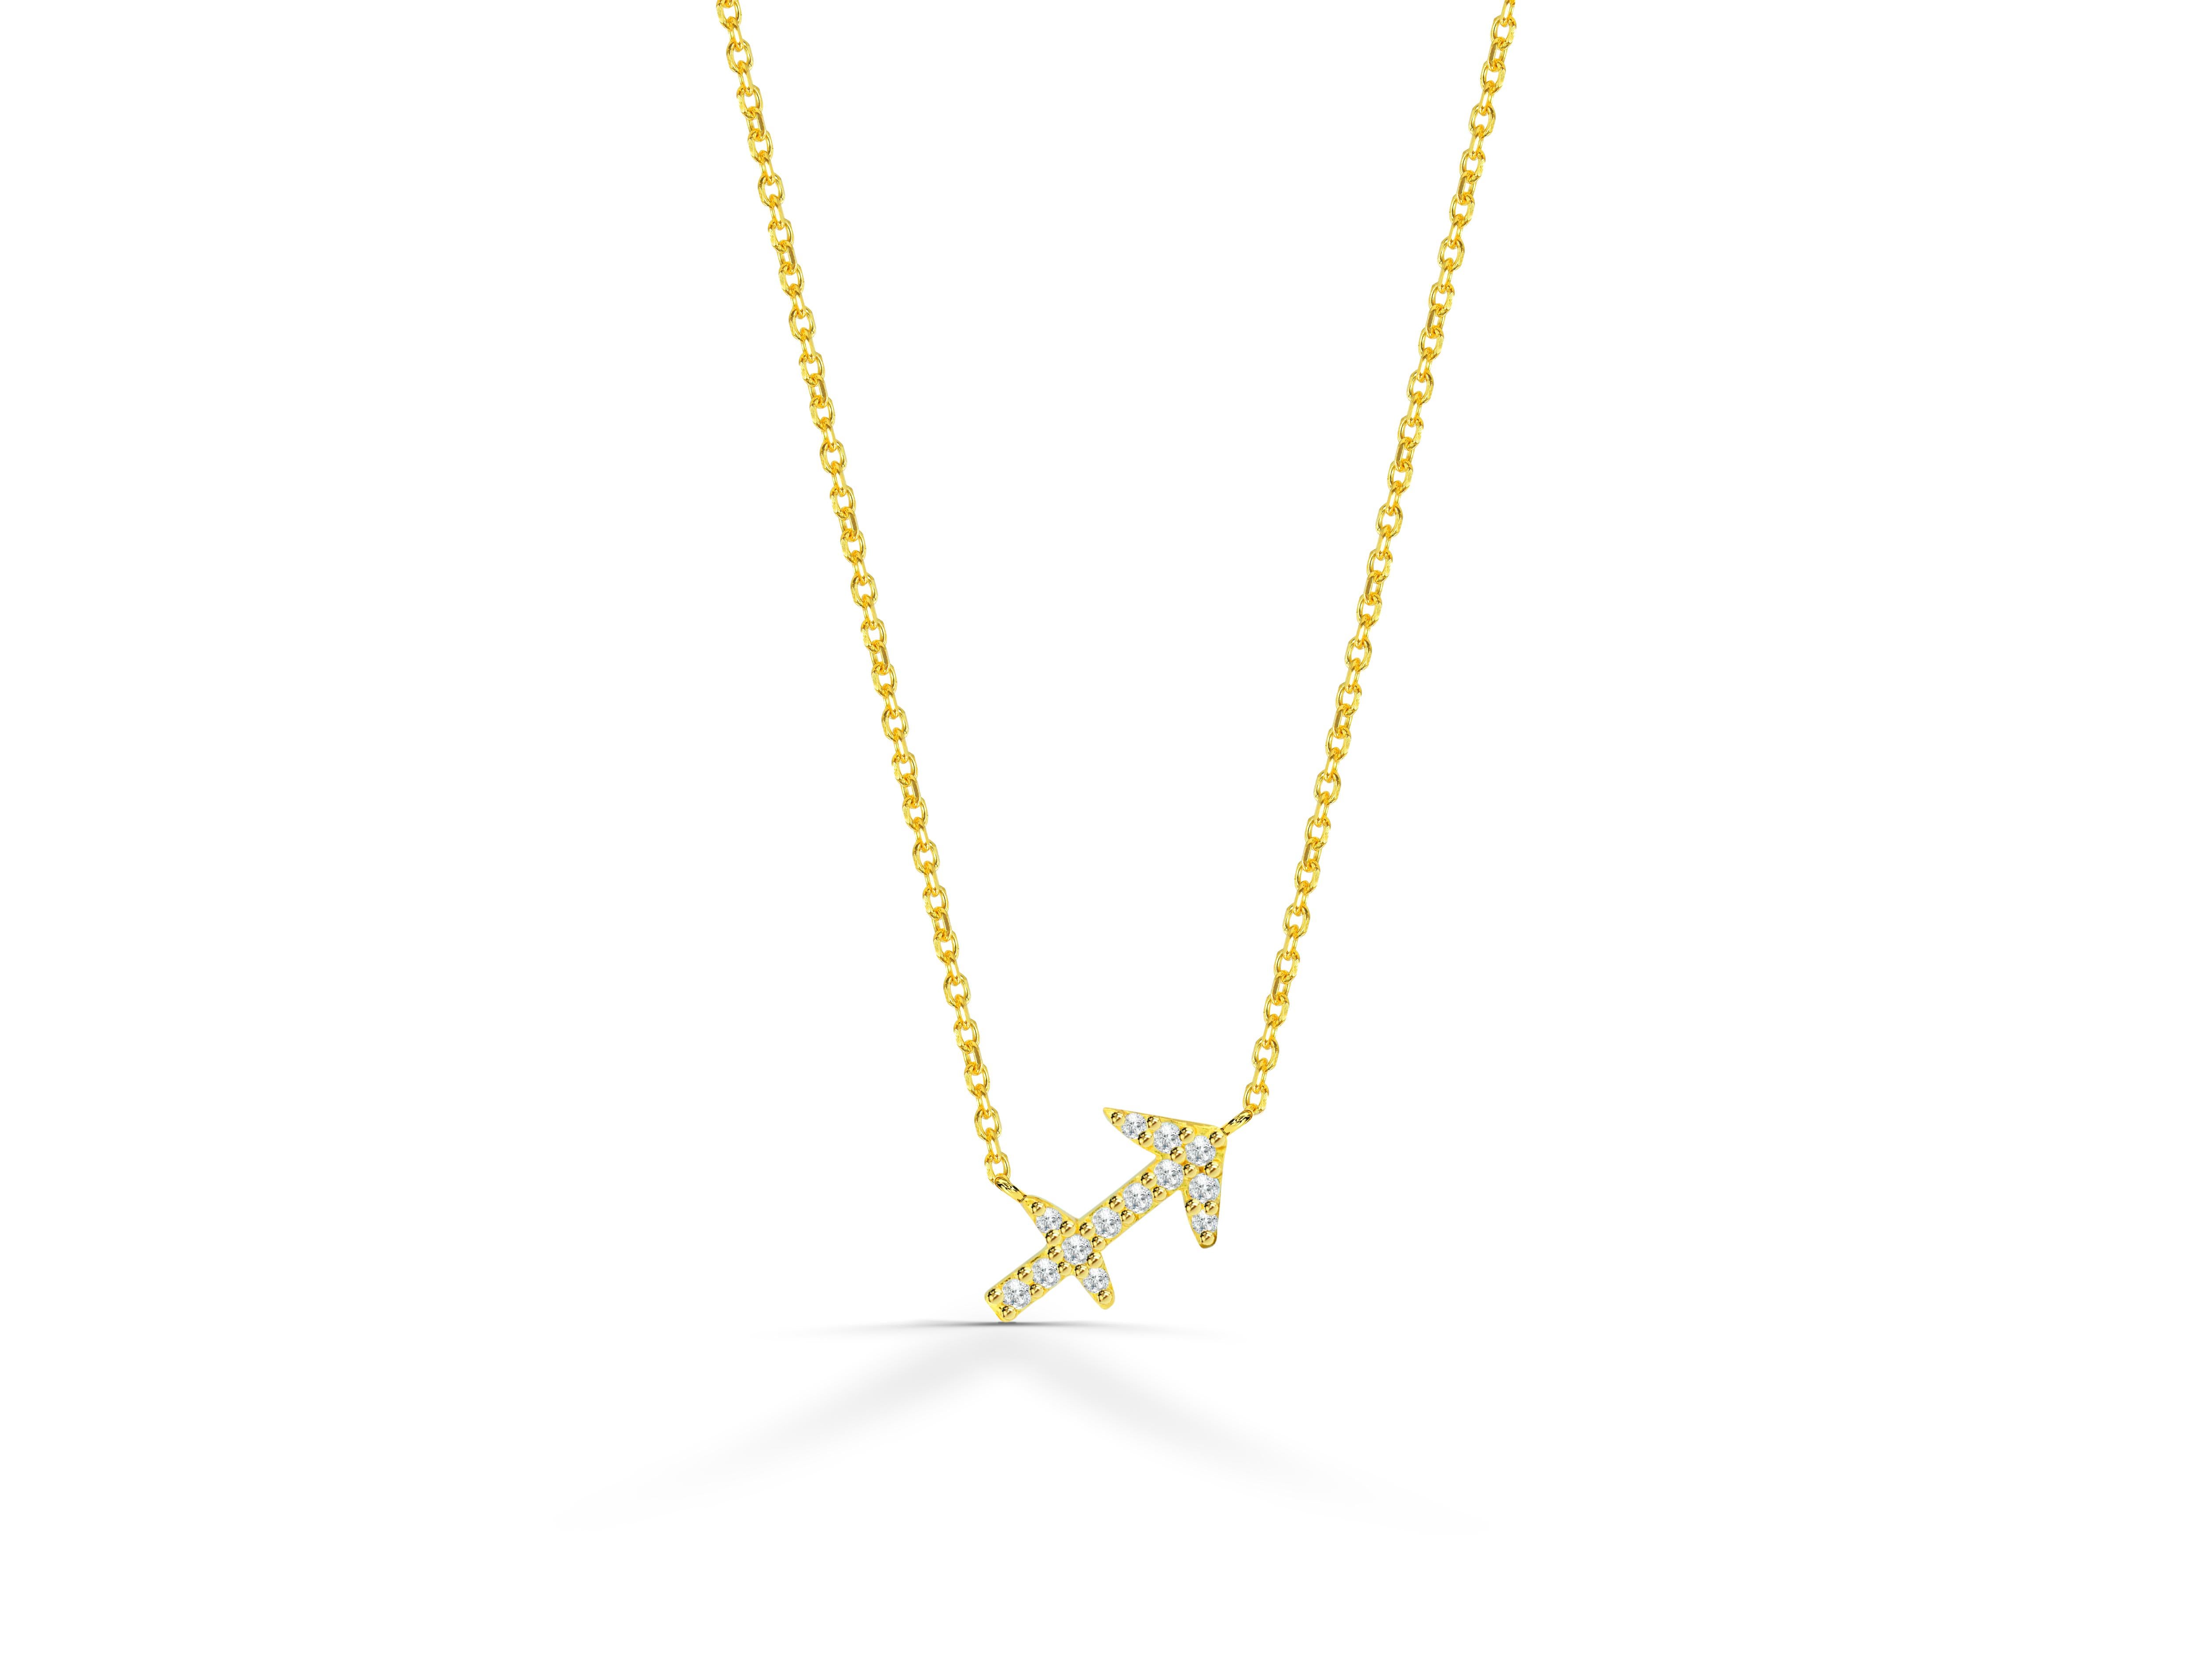 Diamond Necklace Sagittarius Zodiac Sign Gold Zodiac Birth Sign Necklace Gift for Sagittarius, Zodiac Jewelry Star Sign Diamond Pendant

Beautiful and Sparkly Diamond Sagittarius Necklace in 18k gold. Perfect for gifting your loved ones. This piece